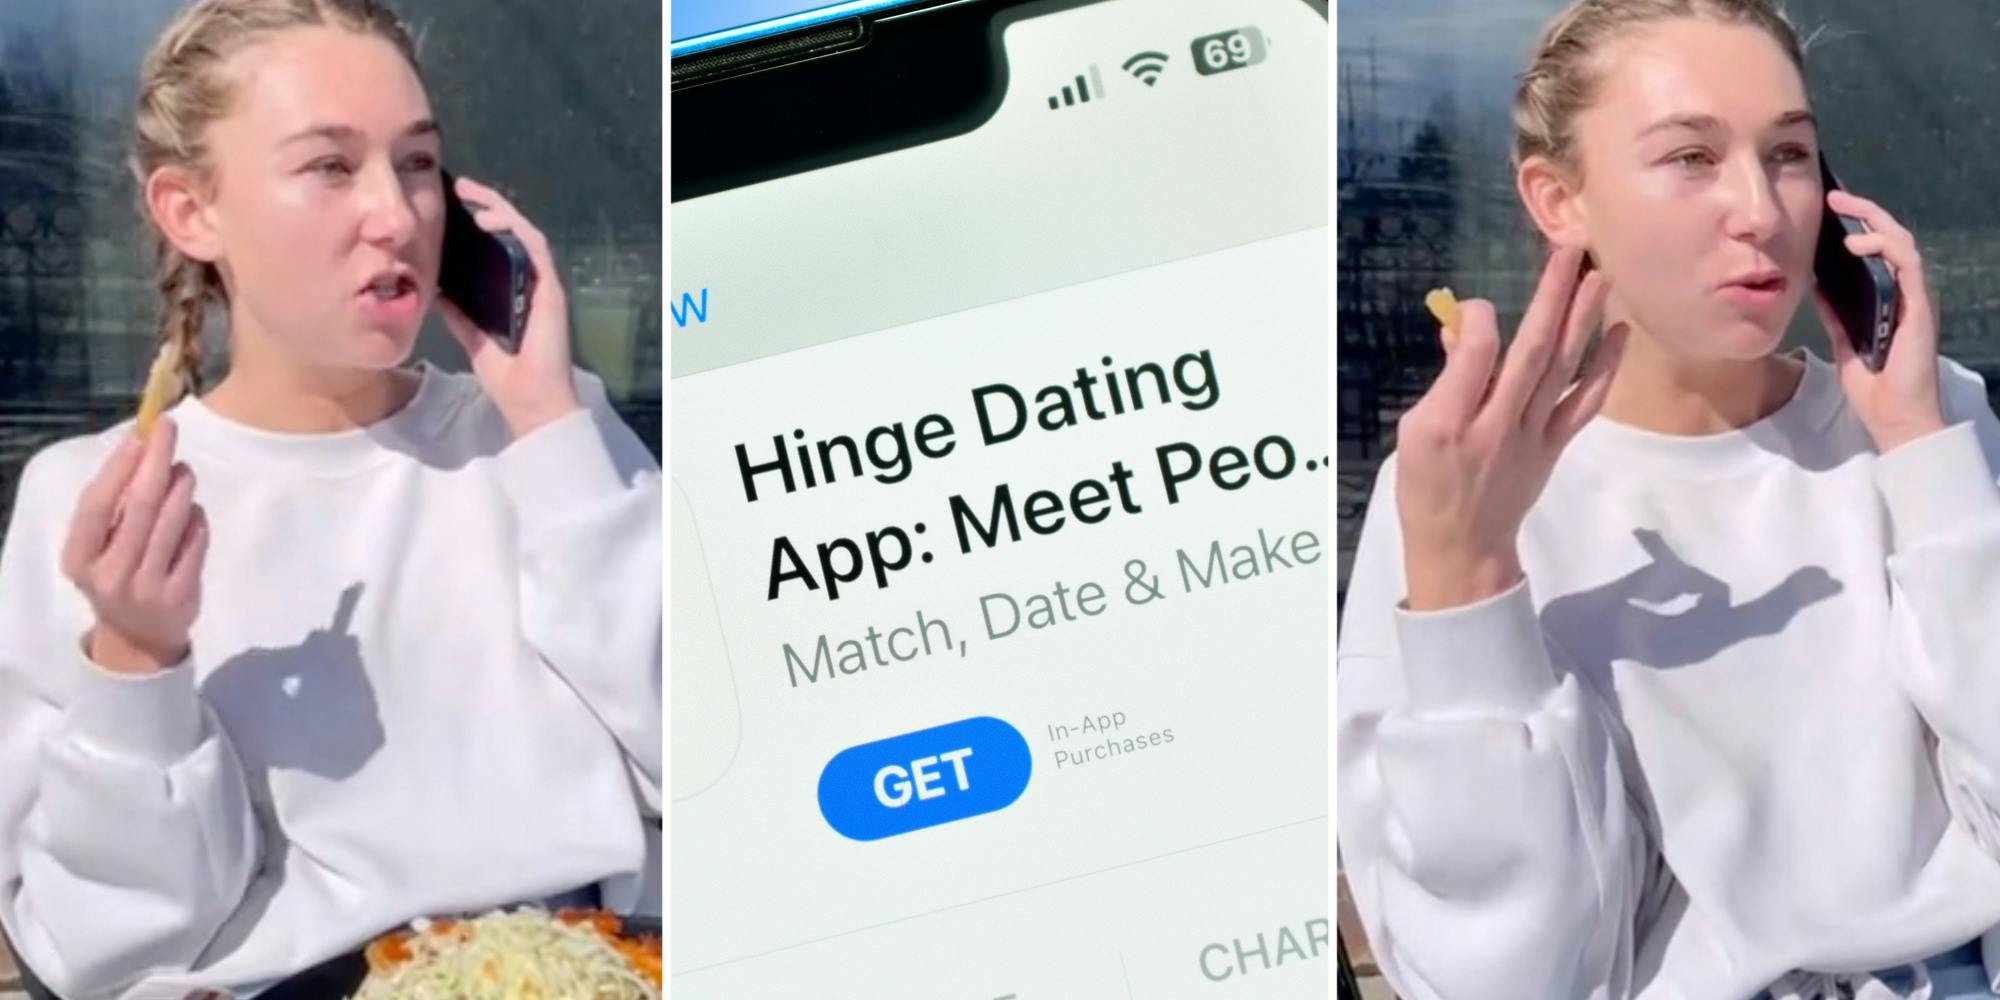 Woman on the phone(l+r), Hinge Dating app on phone(c)